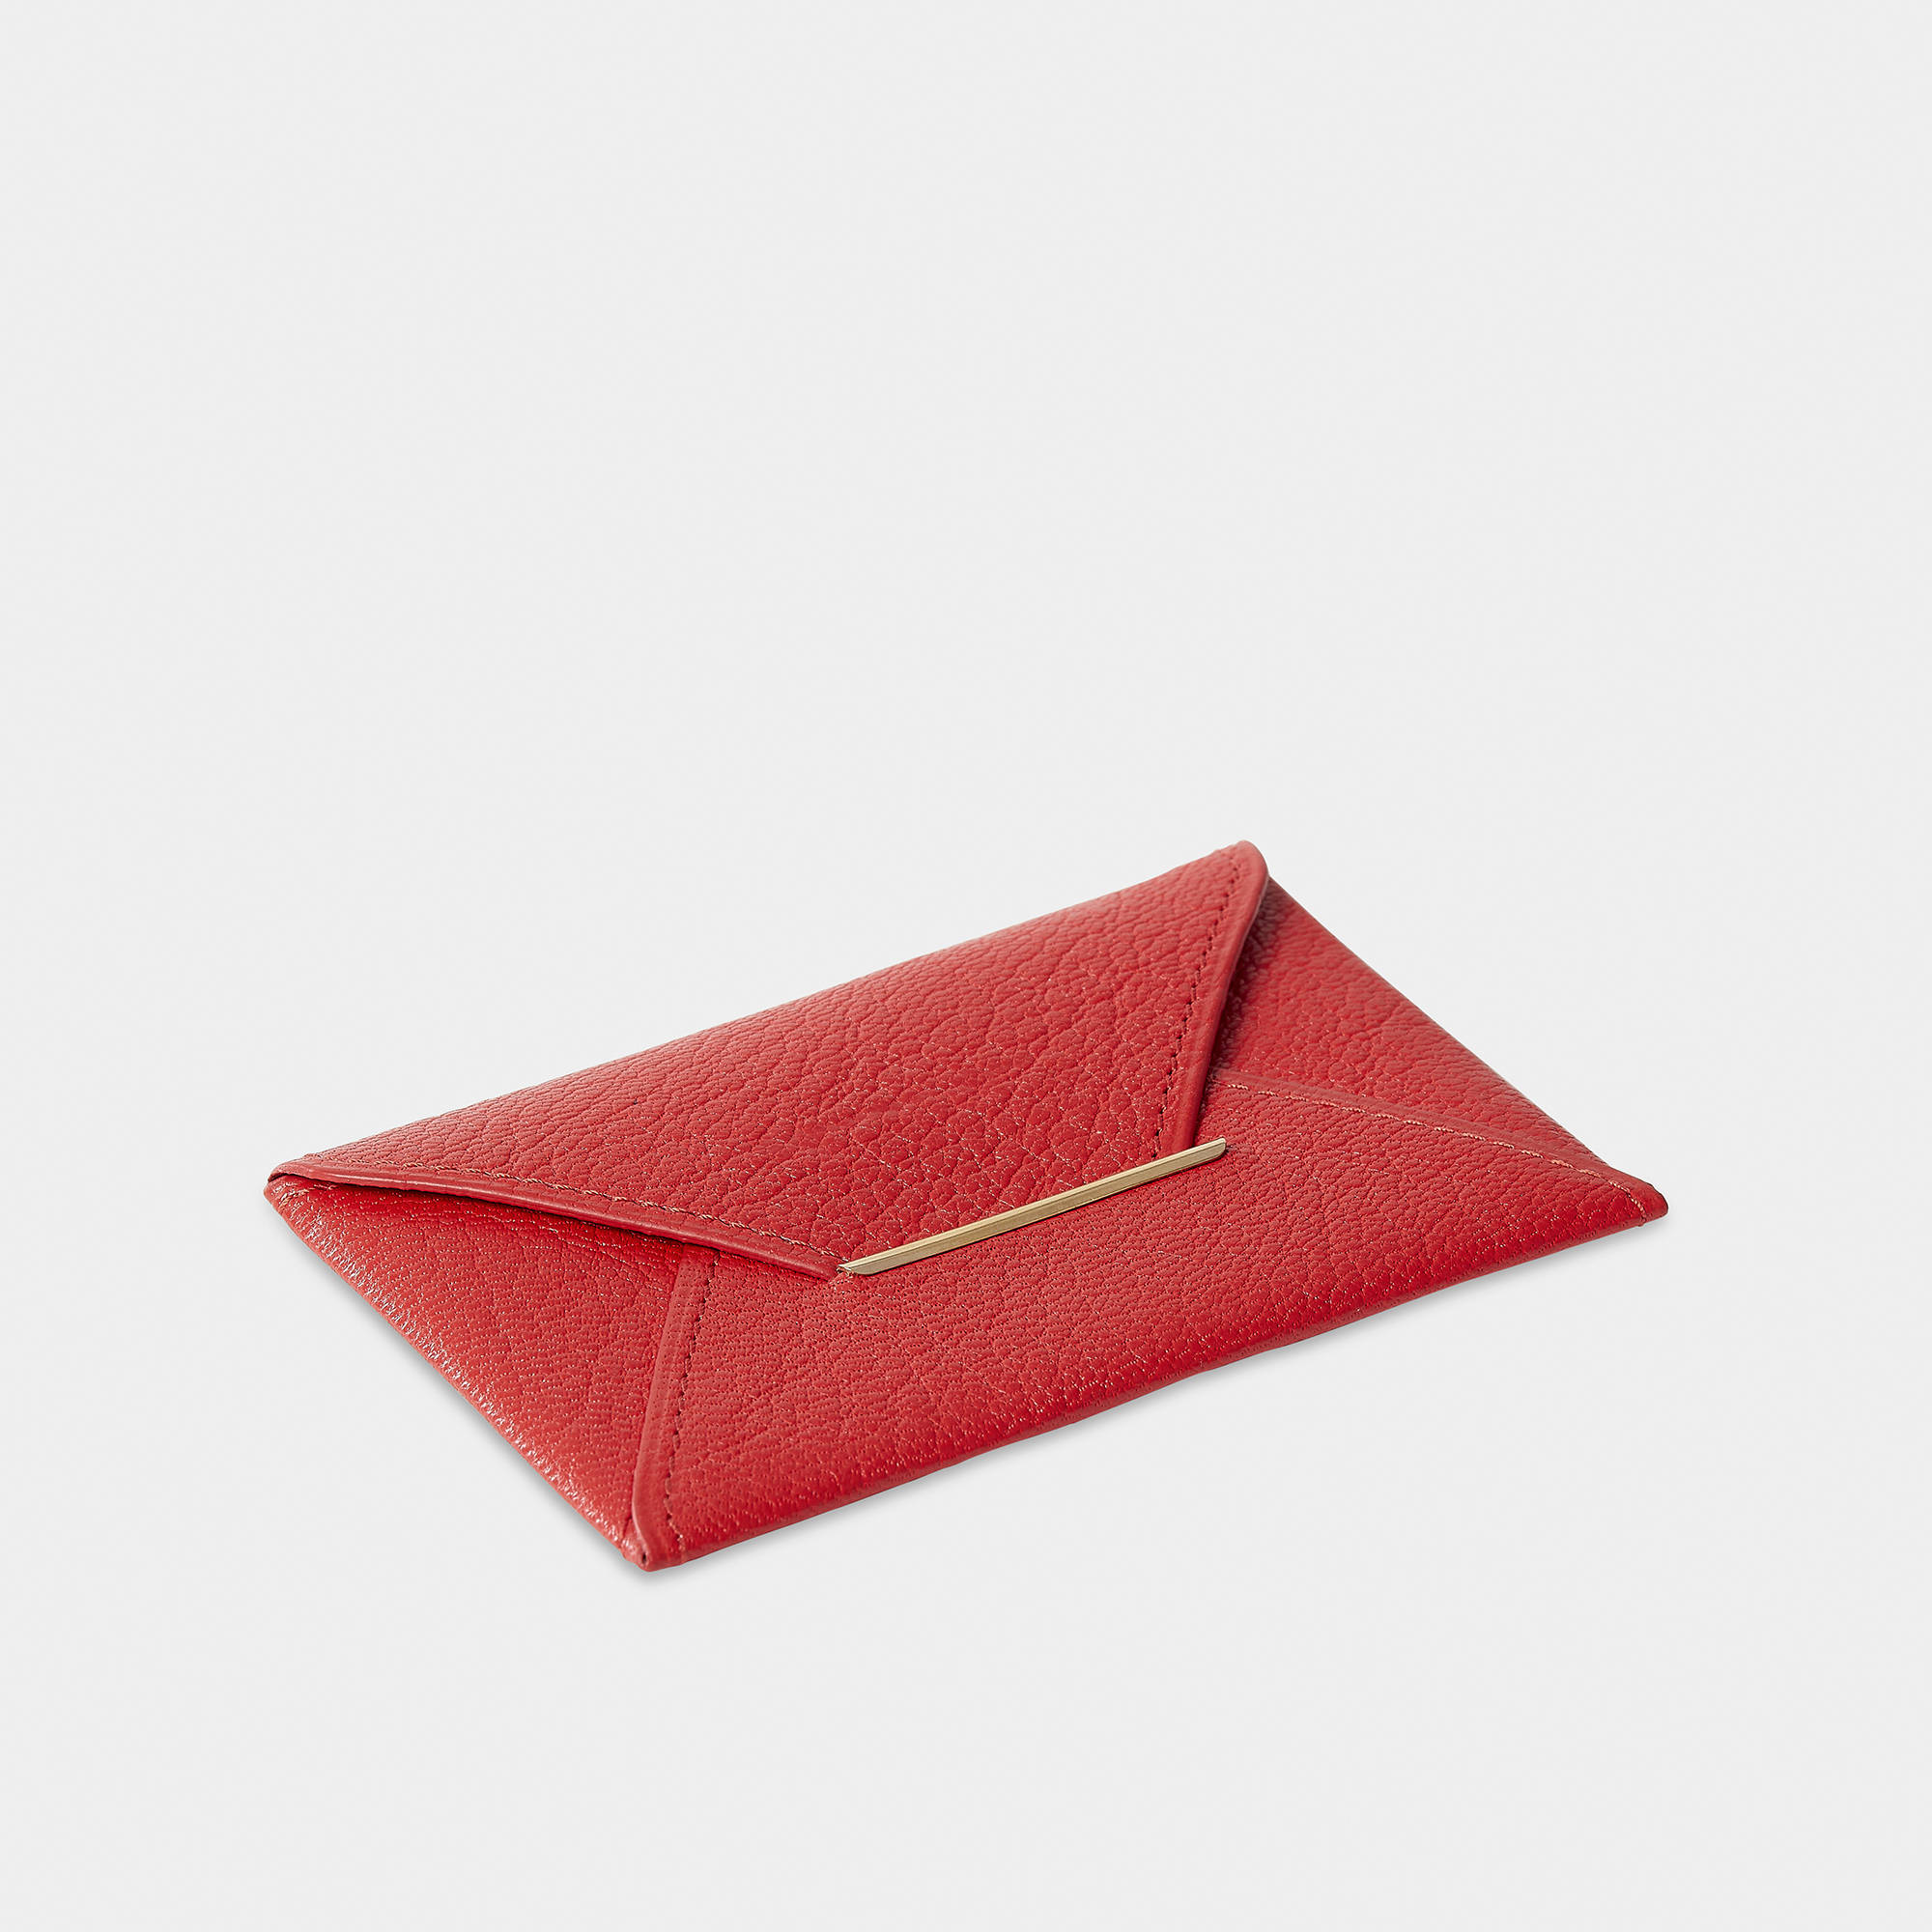 Envelope style cards business cards holder - Brown with red